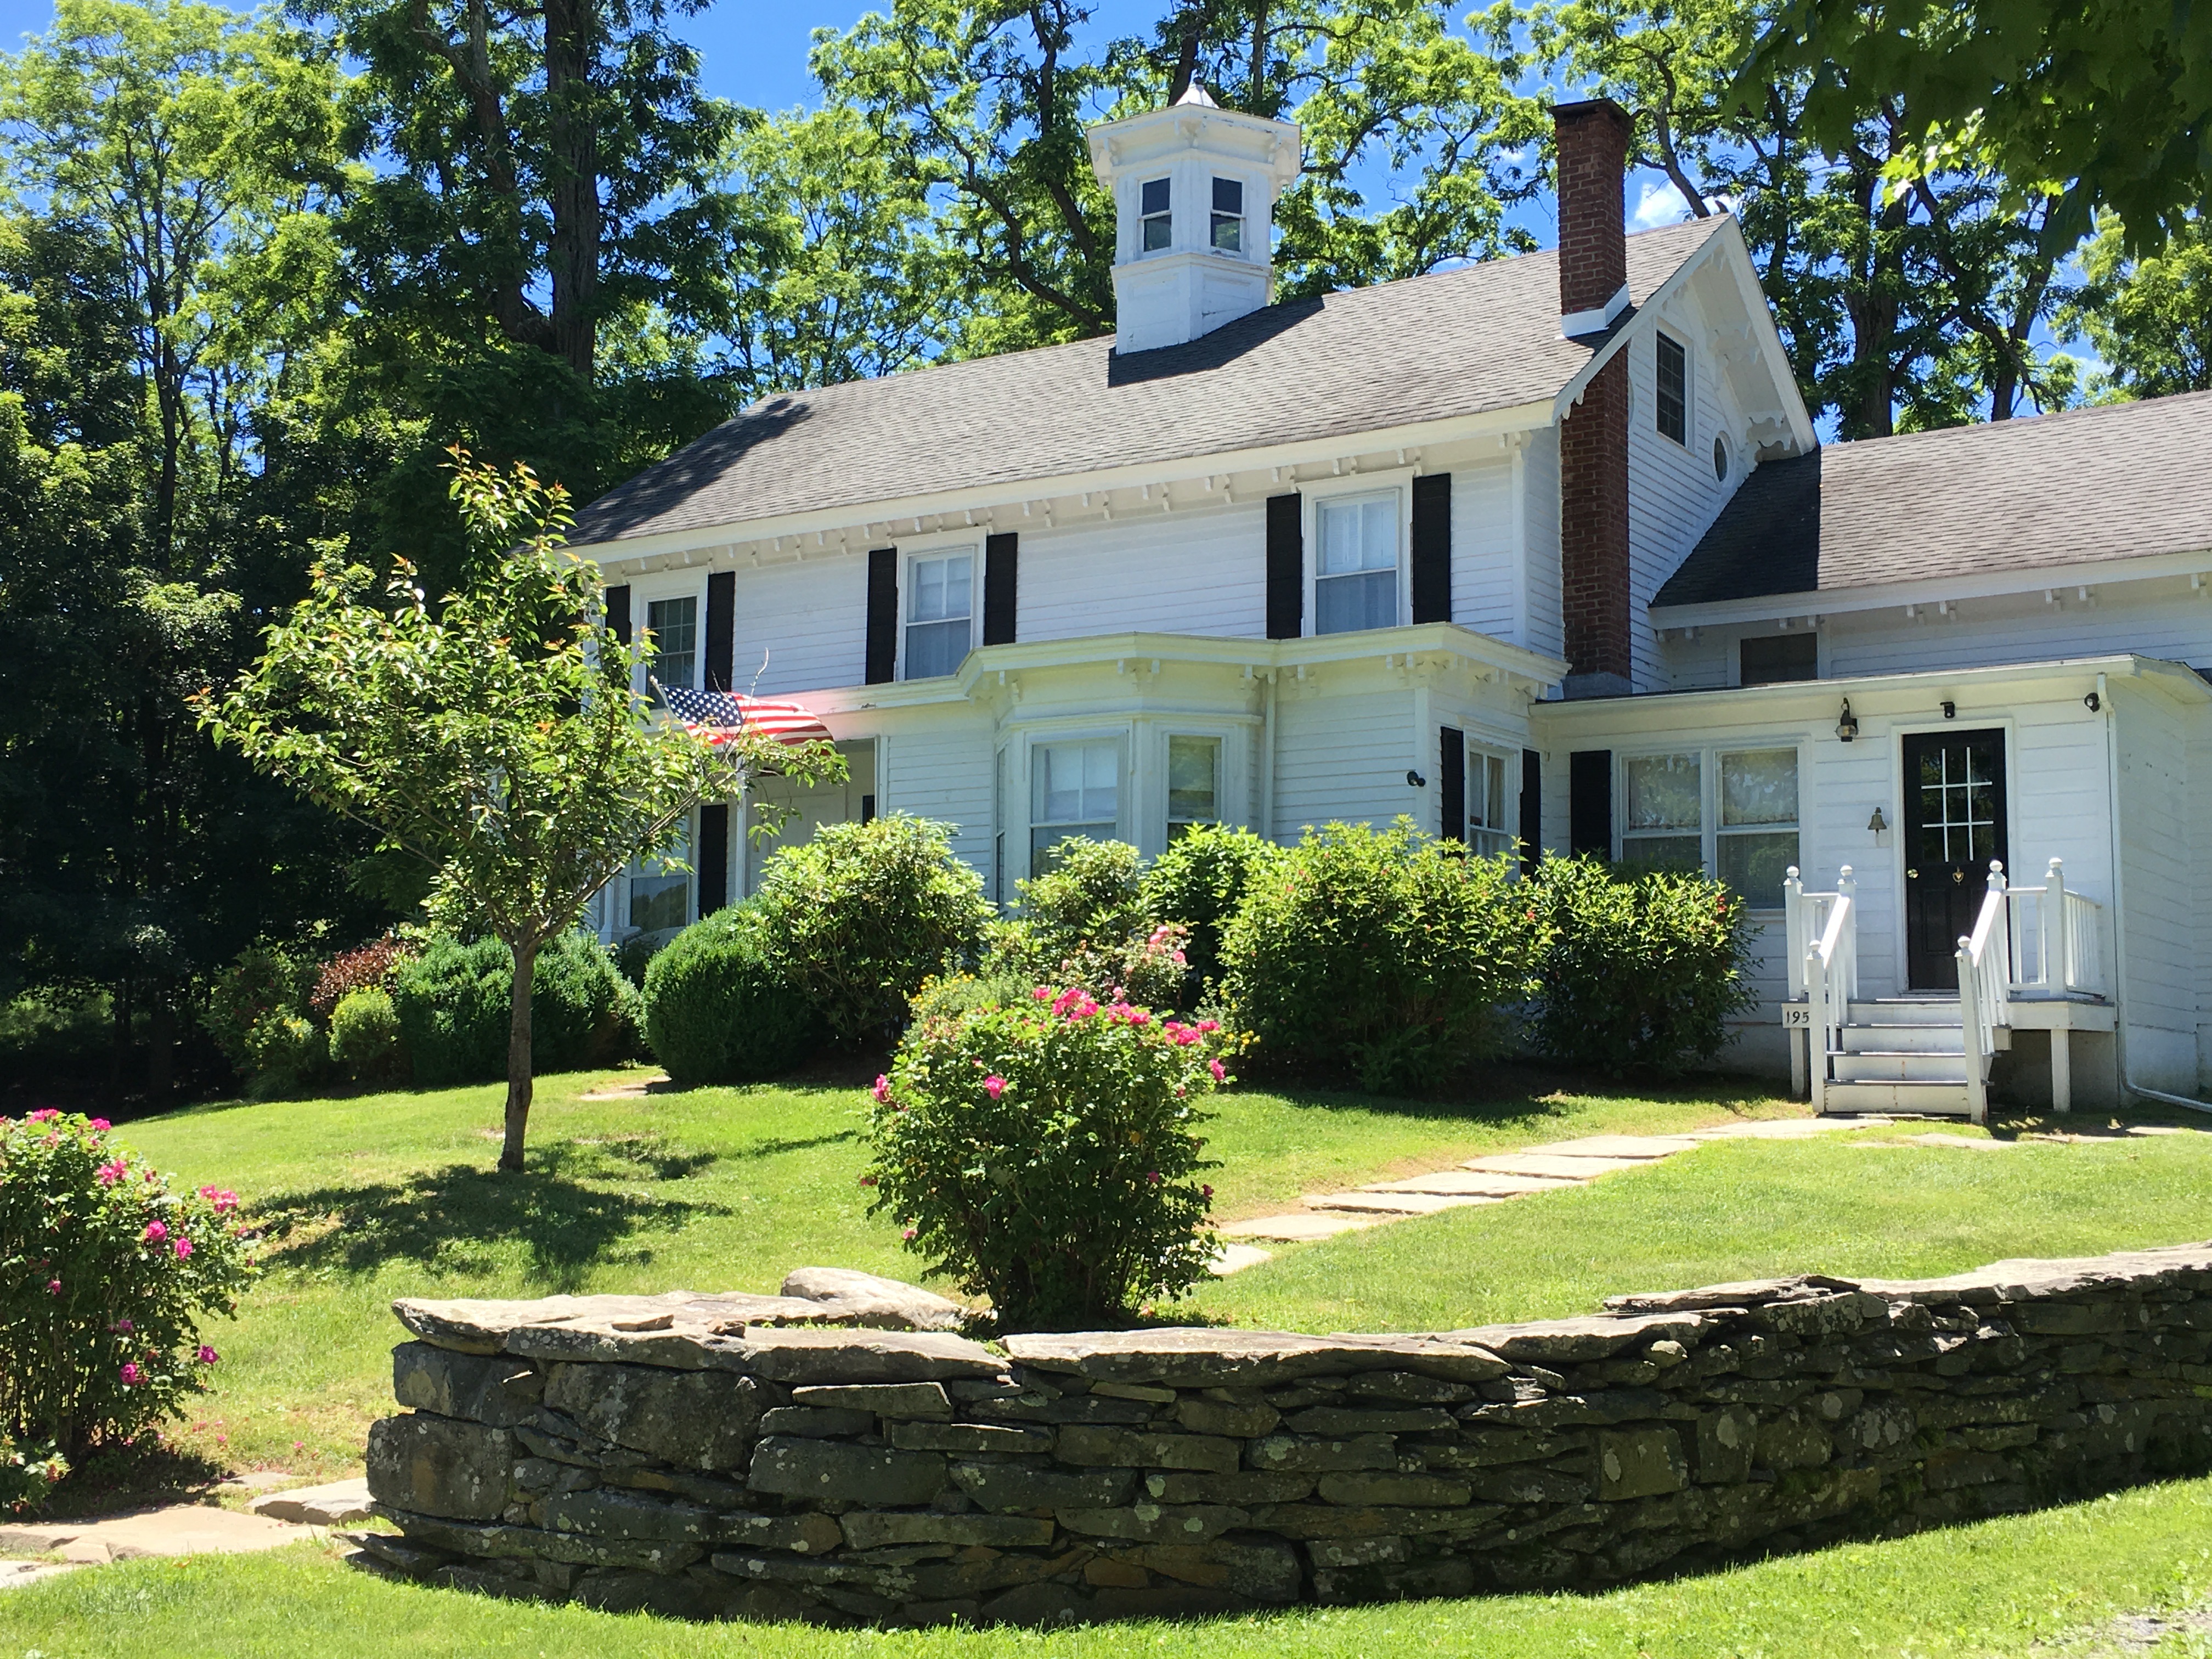 RECENT SALE: Staatsburg, NY $1,200,000 Represented Seller 